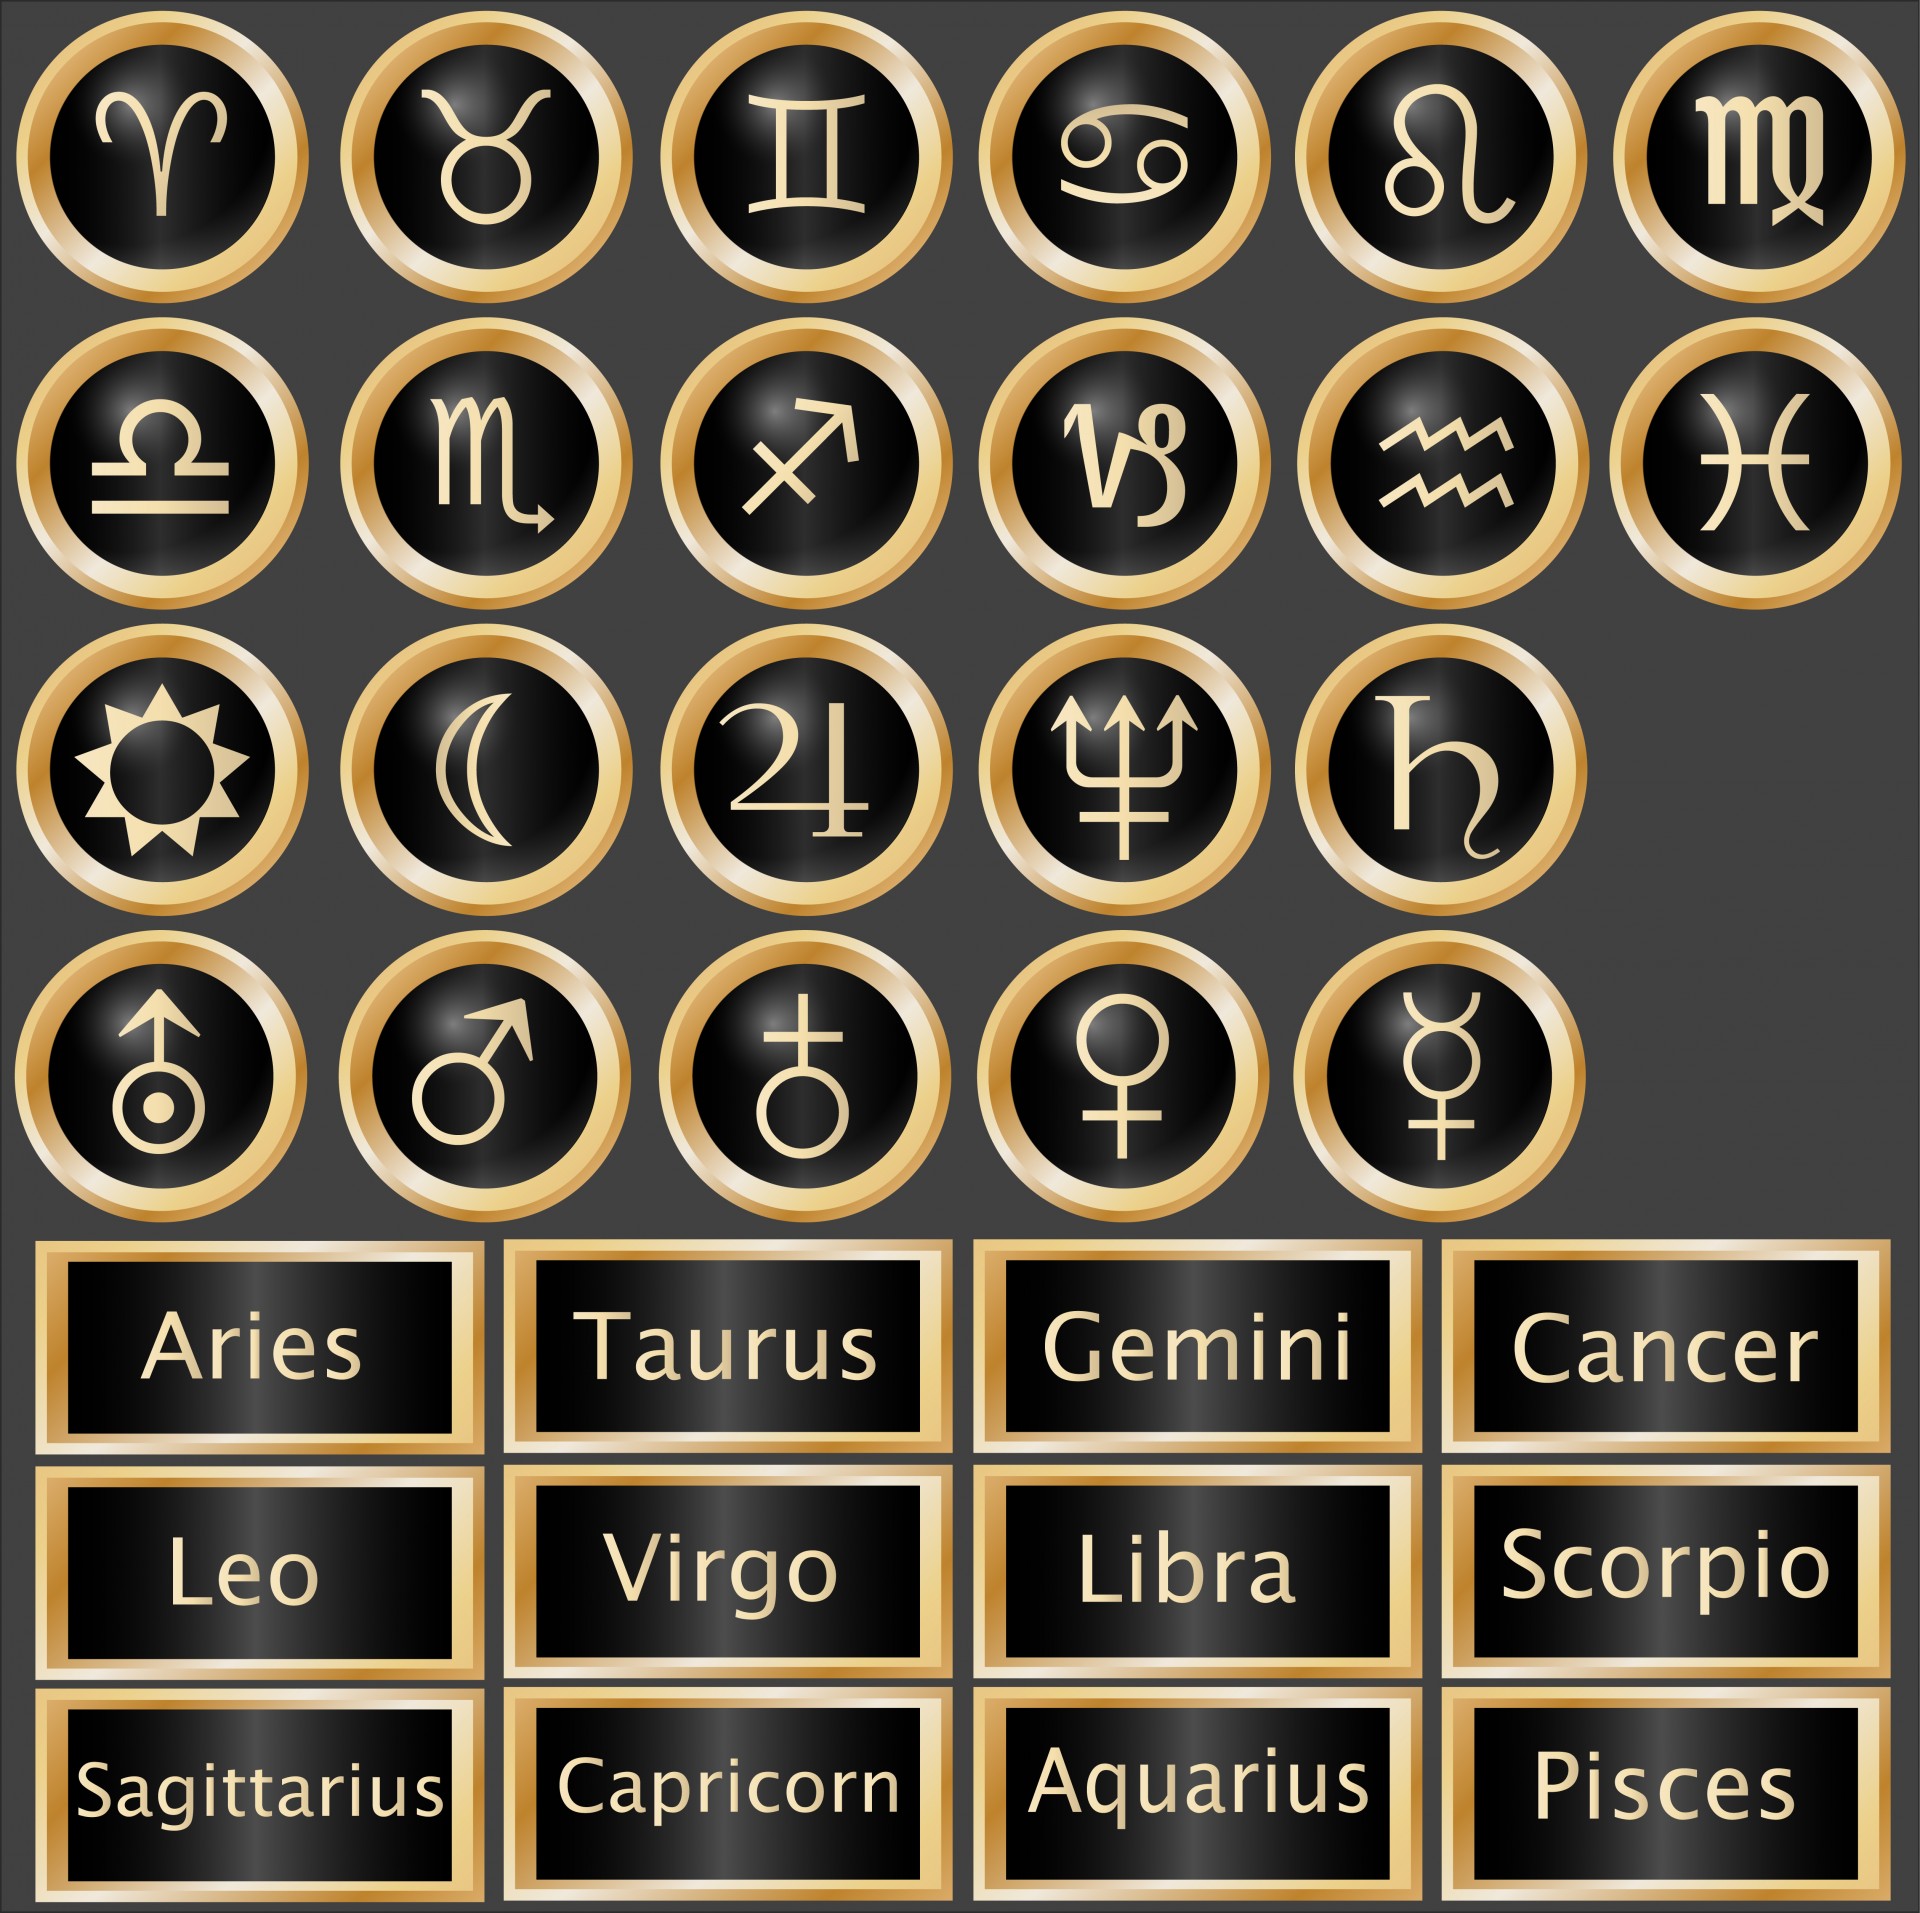 Black and gold buttons and bars depicting the signs of the astrology chart